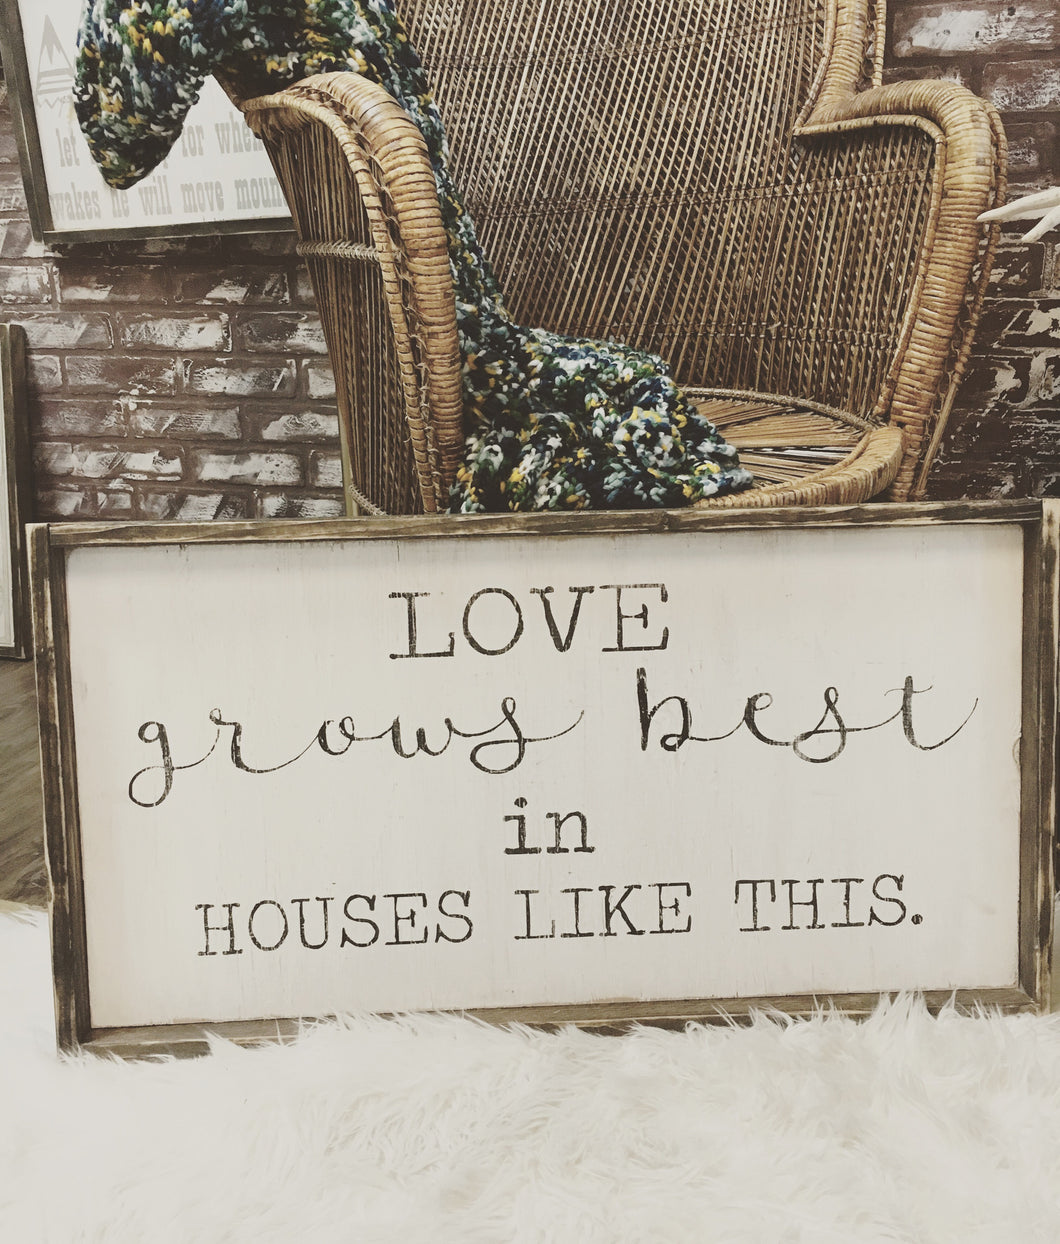 Love Grows Best - Mixed Fonts